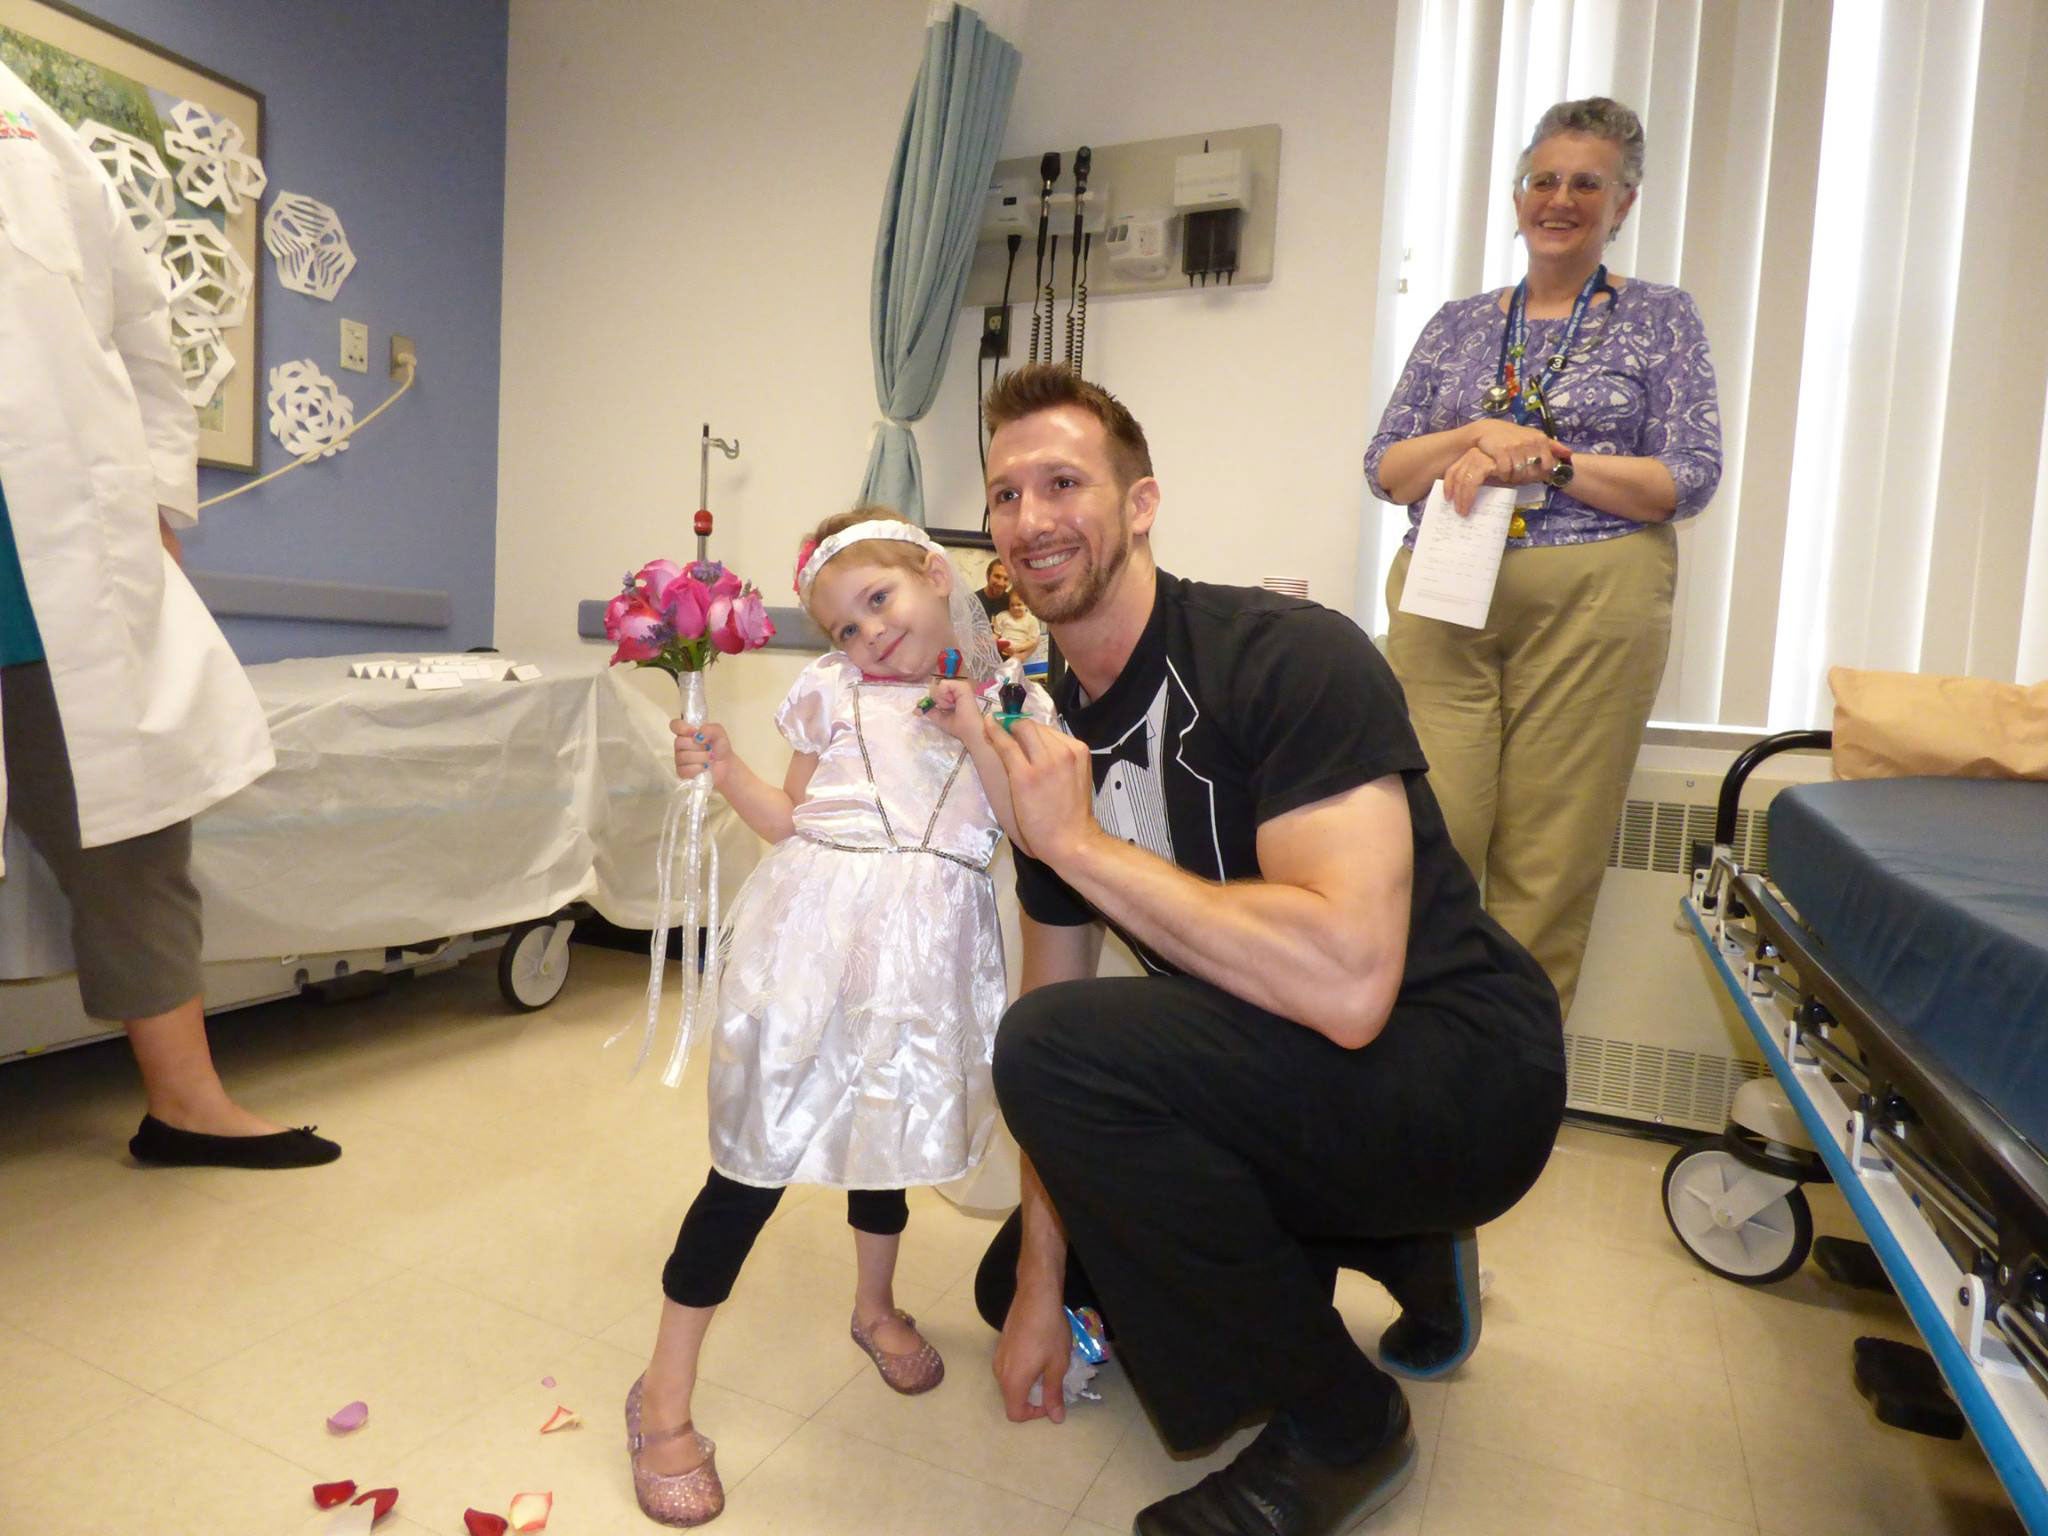 Abby 'married' her cancer nurse Matt Hickling at a ceremony organised by hospital staff